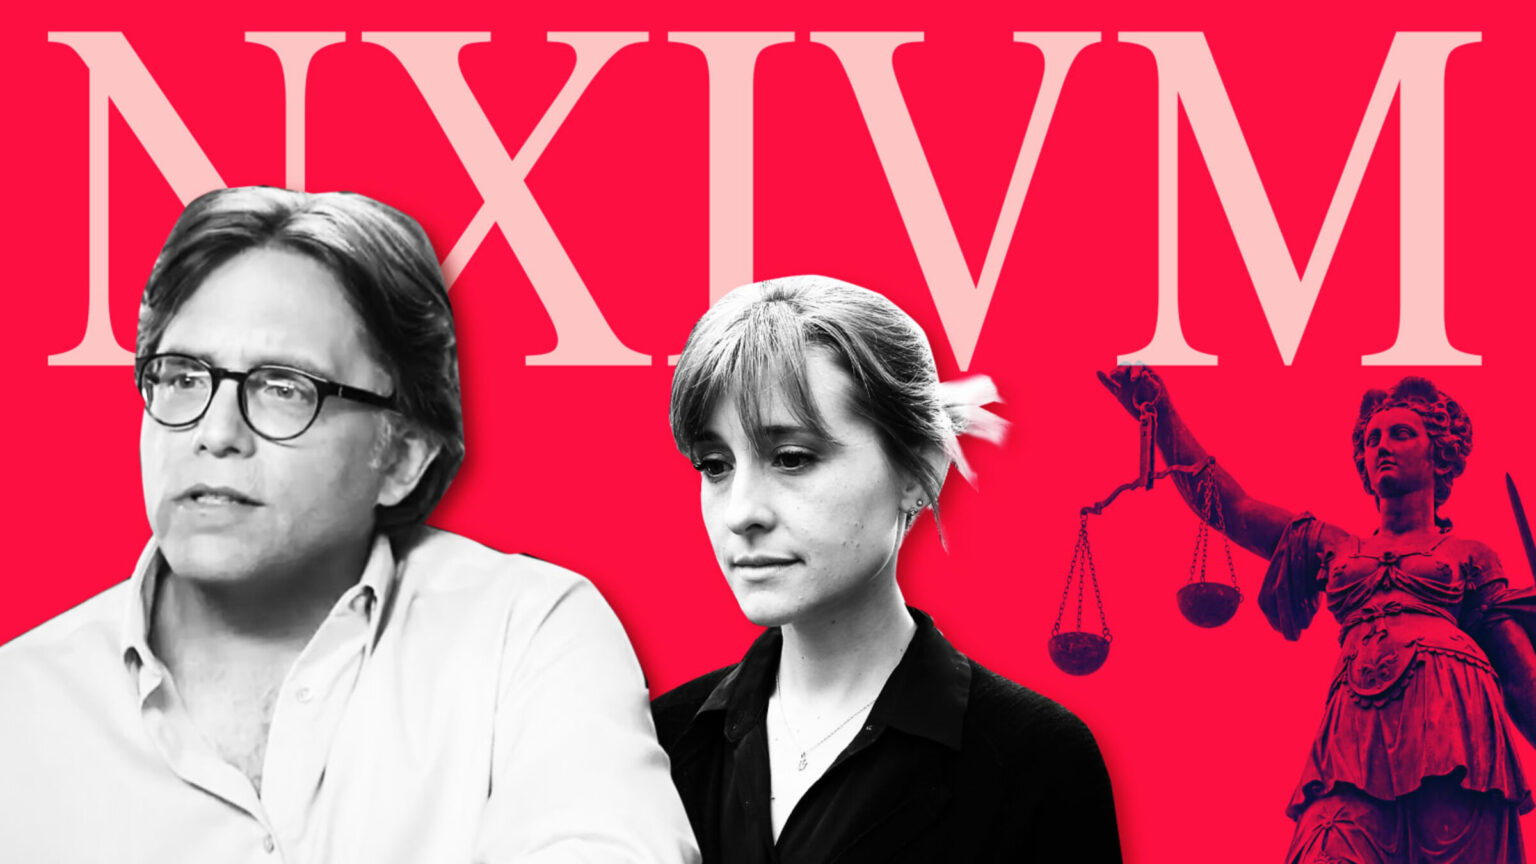 Keith Raniere was a master manipulator and convinced many rich and powerful people that they needed to join NXIVM. Here's what we know.